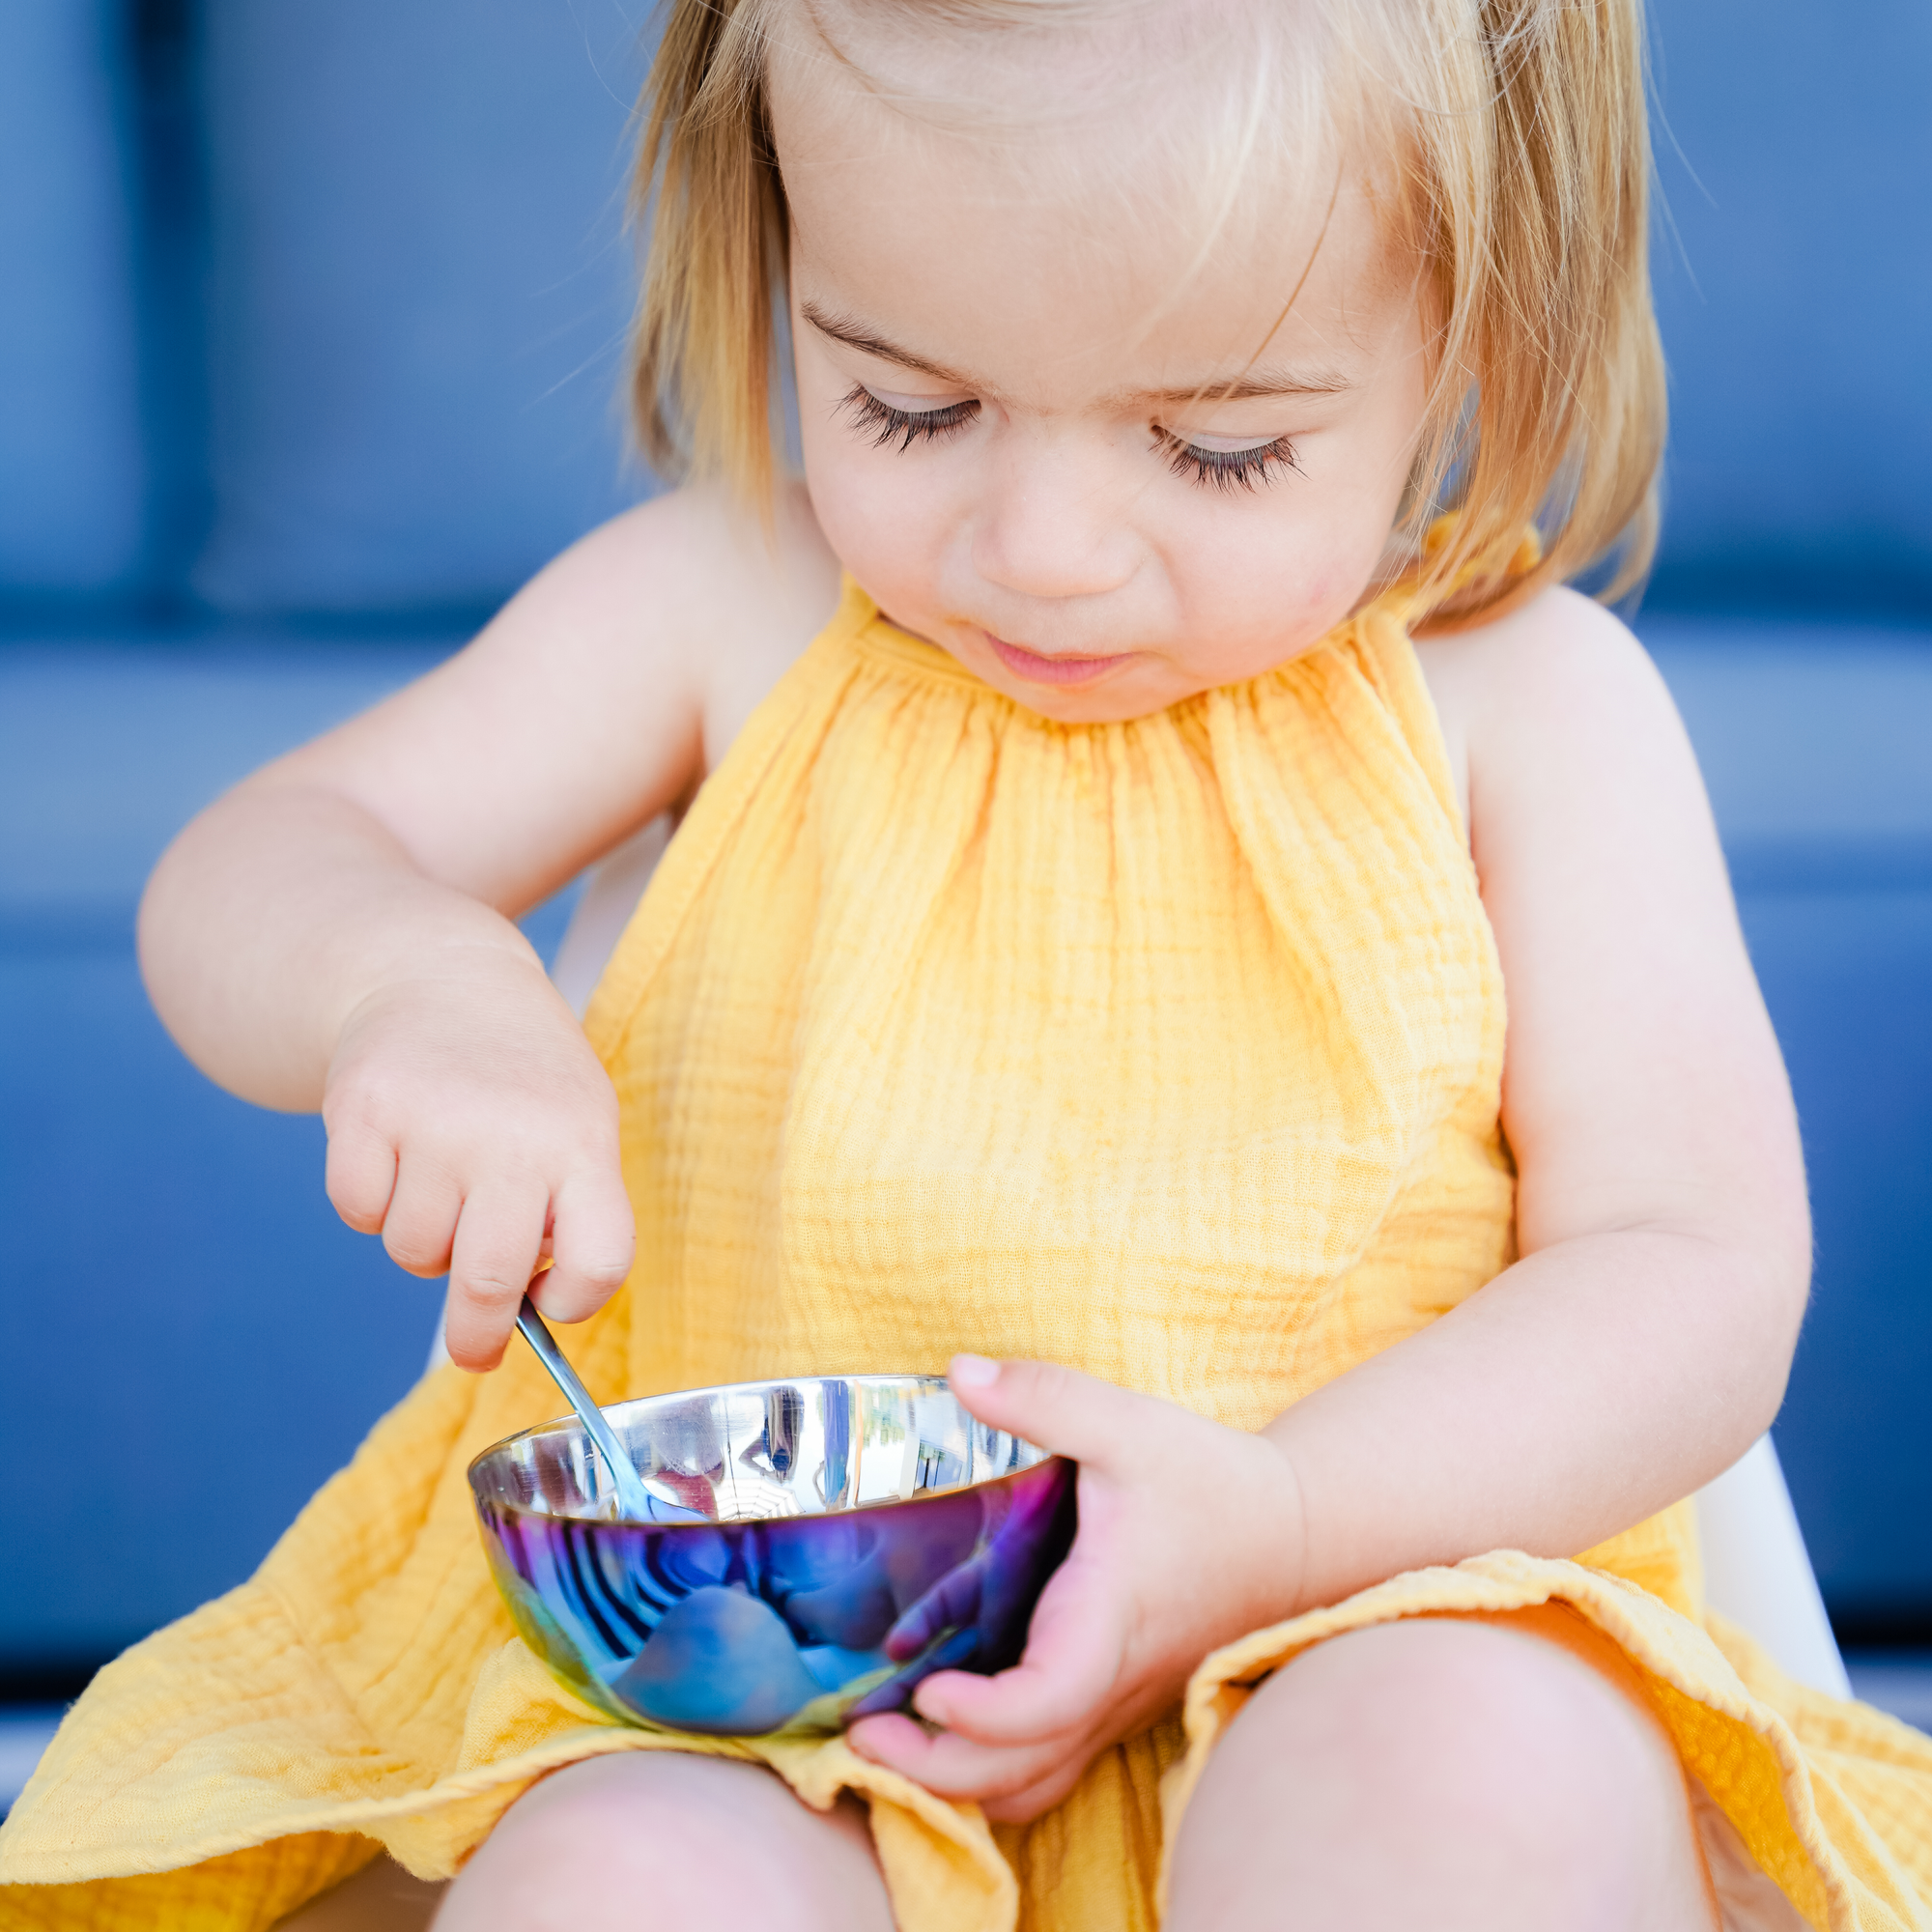 Check out our Mealtime Guides for toddlers ages 1 to 3 for general guidelines on transitioning from baby to toddler, healthy portions and variety and toddler nutrition